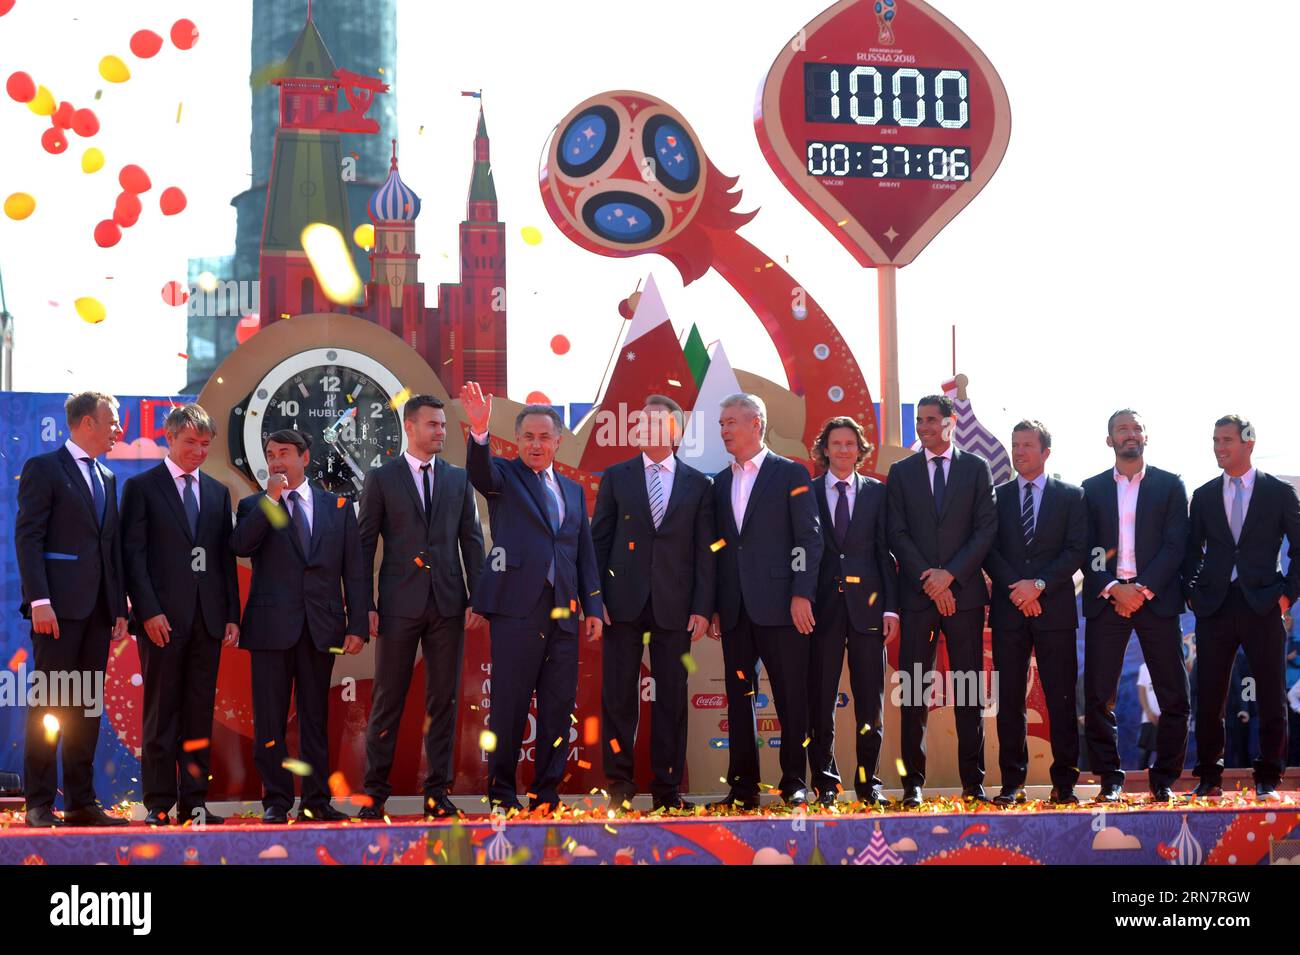 (150918) -- MOSCOW, Sept. 18, 2015 -- FIFA s director of competition Colin Smith, Russia 2018 Organizing Committee General Director Alexei Sorokin, Russian Presidential Aide Igor Levitin, goalkeeper Igor Akinfeev of the Russian men s national football team, Russia s Sport Minister, Russian Football Union President Vitaly Mutko, Russia s First Deputy Prime Minister Igor Shuvalov, Moscow Mayor Sergei Sobyanin, Alexei Smertin, former member of the Russian men s national football team, Spain s former football player Fernando Hierro, Germany s former football player Lothar Matthaus, Italy s former Stock Photo